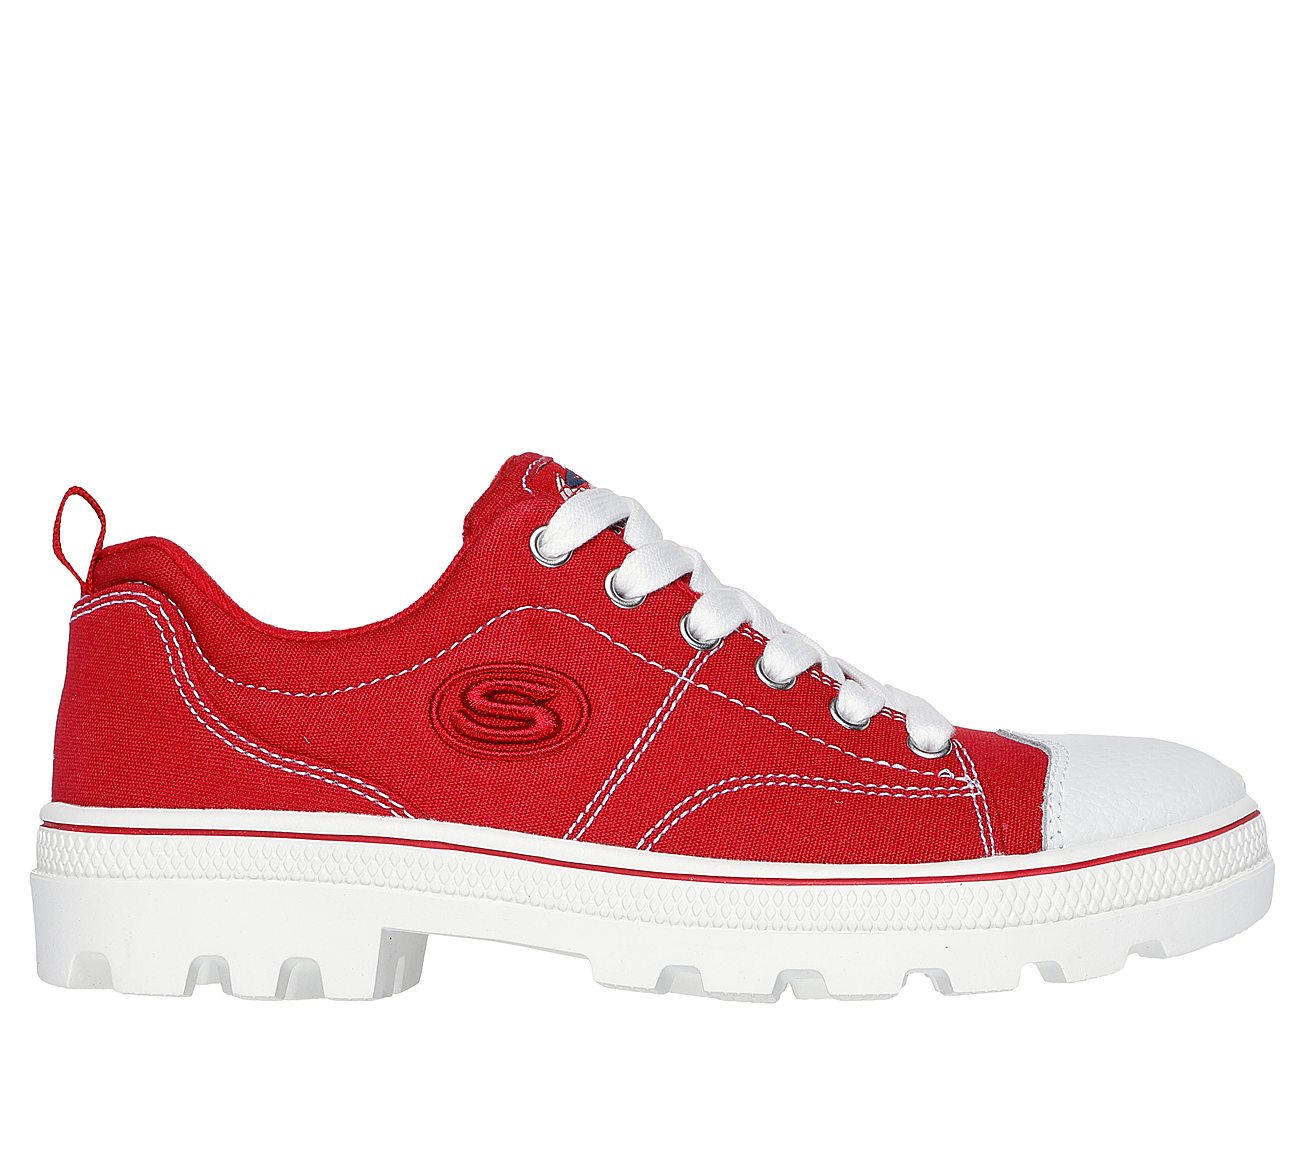 skechers cloth shoes